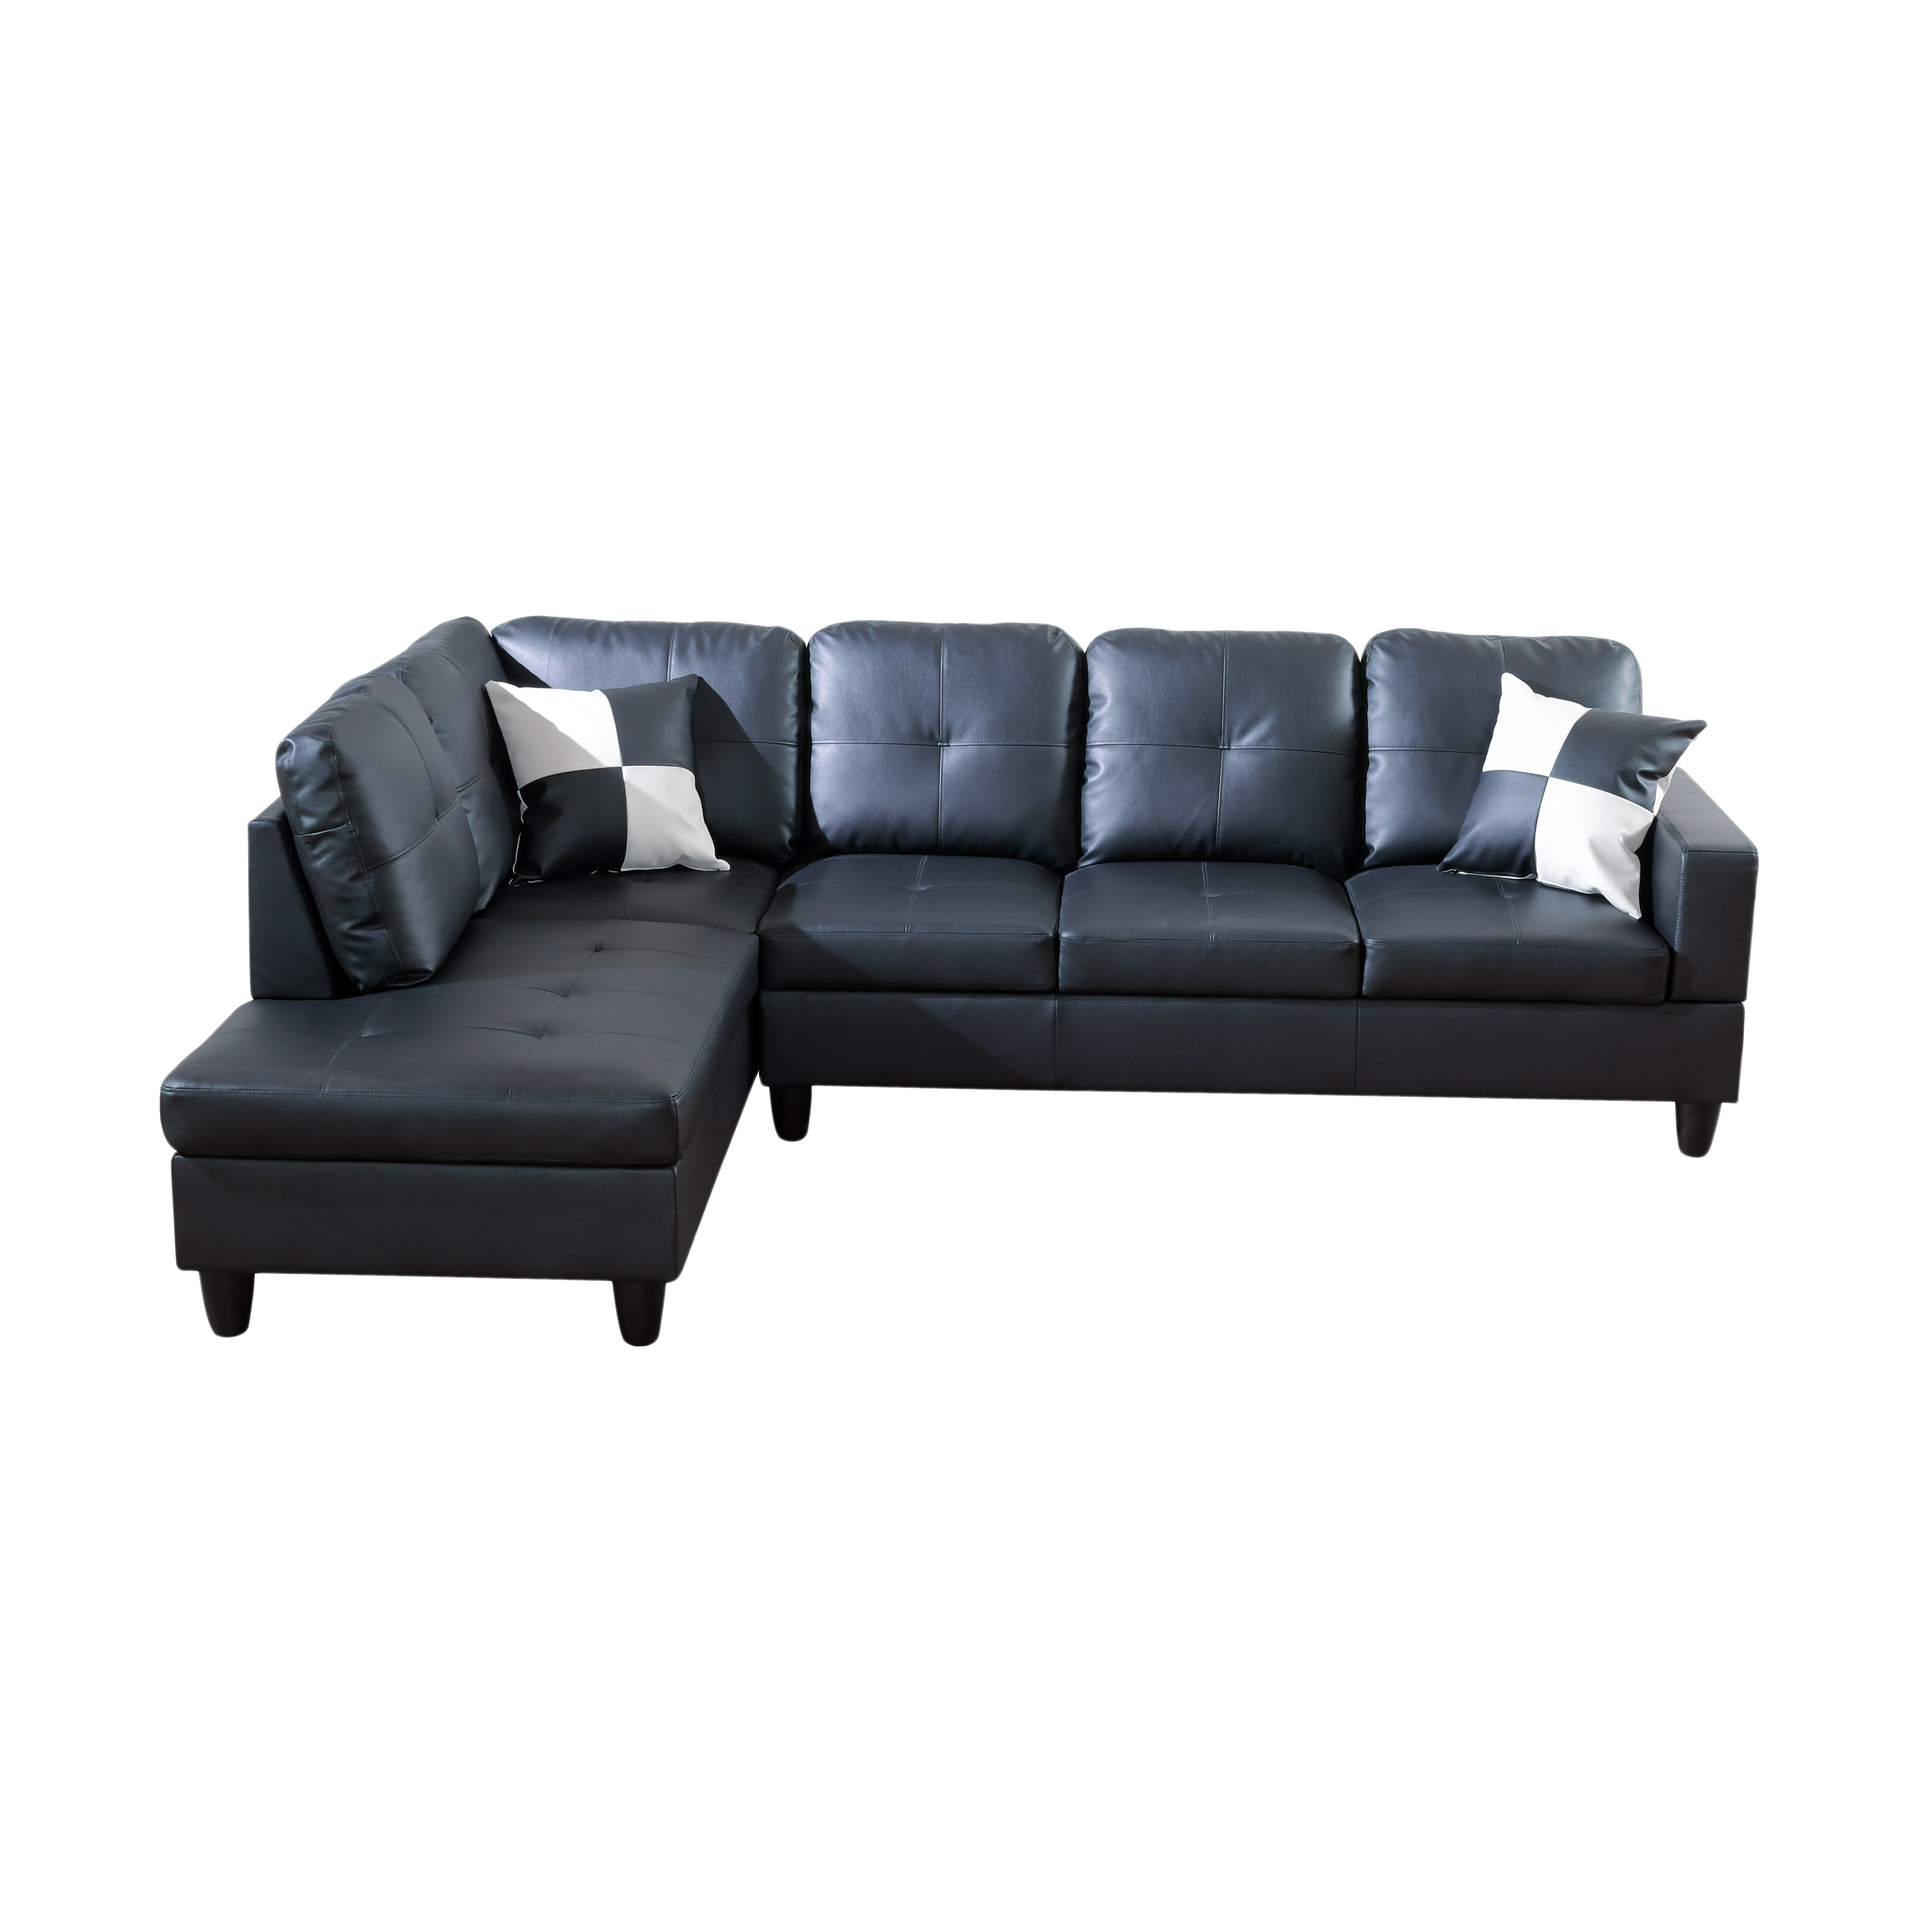 Black Faux Leather Left Handing Facing Chaise Living Room Sofa